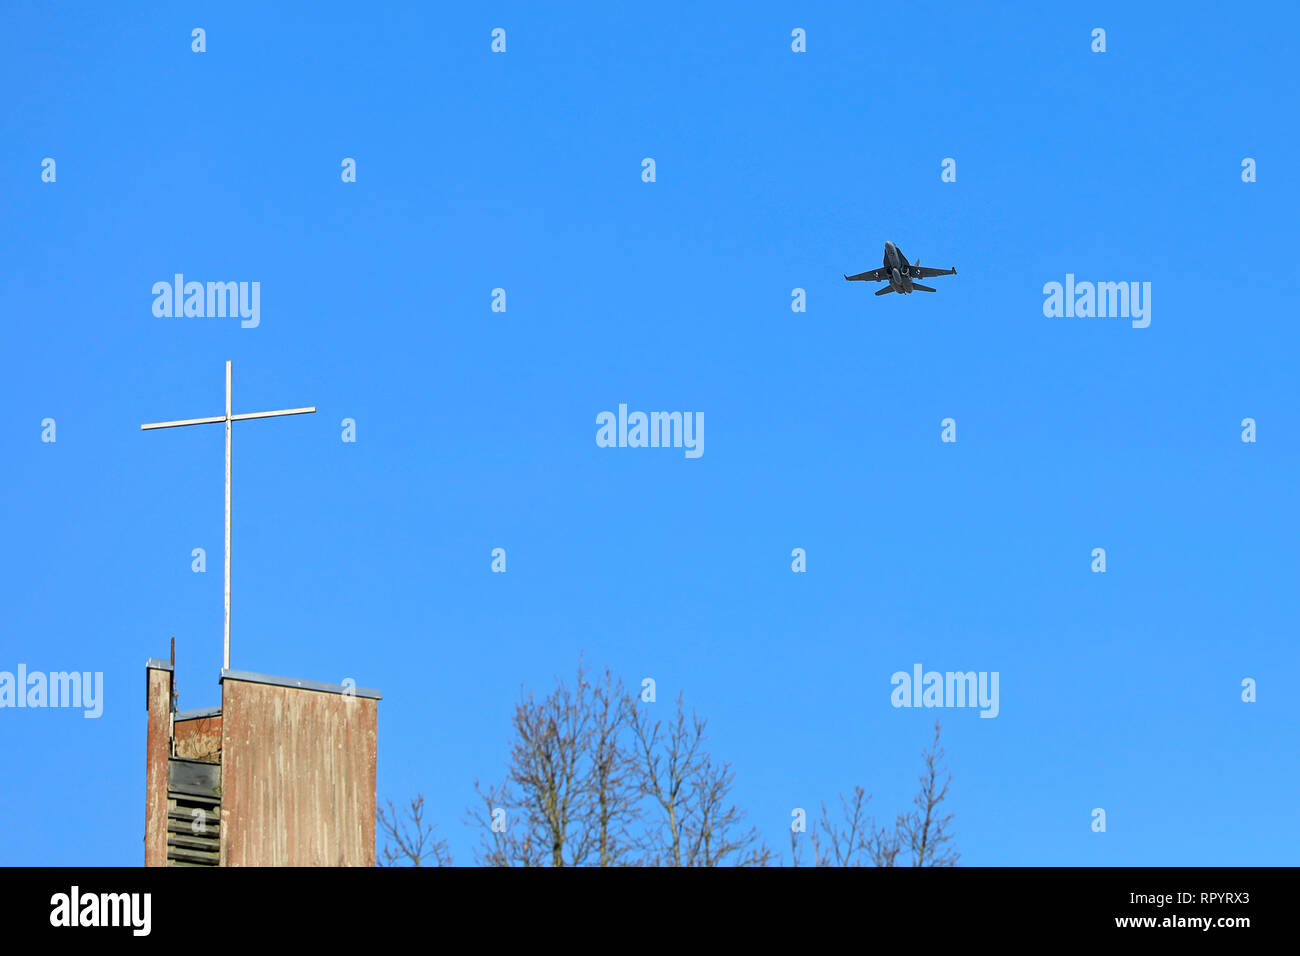 Salo, Finland – February 23, 2019: Finnish Air Force combat jet McDonnell Douglas F/A-18 Hornet flyby and Missing man manoeuvre over Helisnummi Cemetery Chapel in honor of Salo War Veteran, fighter pilot Martti Lehtovaara, deceased at 98. Image credit: Taina Sohlman/Alamy Live News Stock Photo